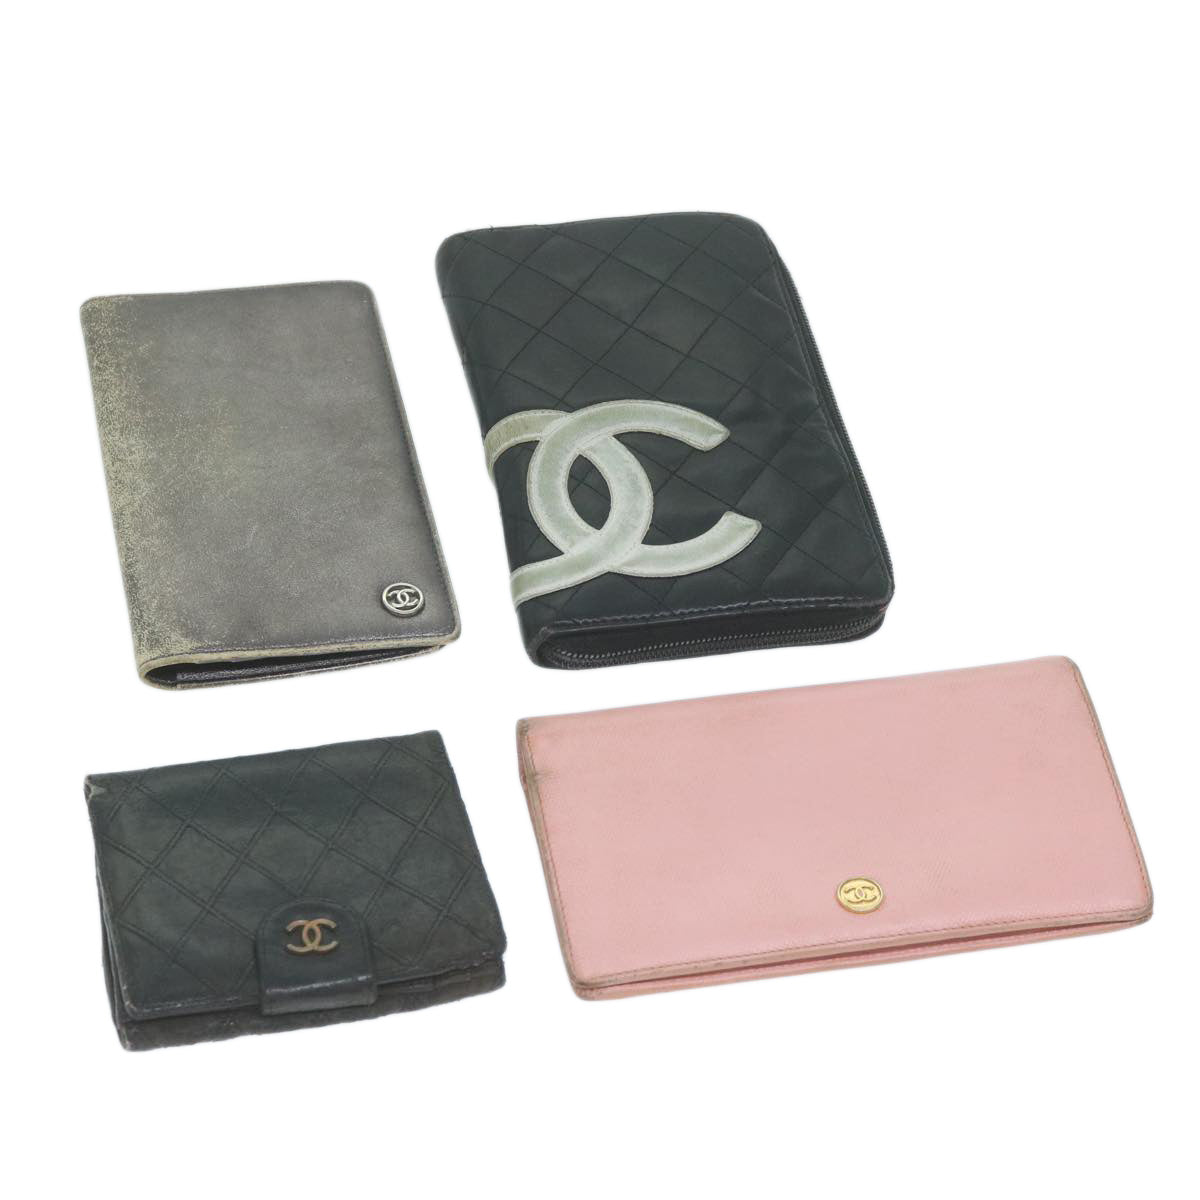 CHANEL Wallet Leather 4Set Black Pink Silver CC Auth bs11167